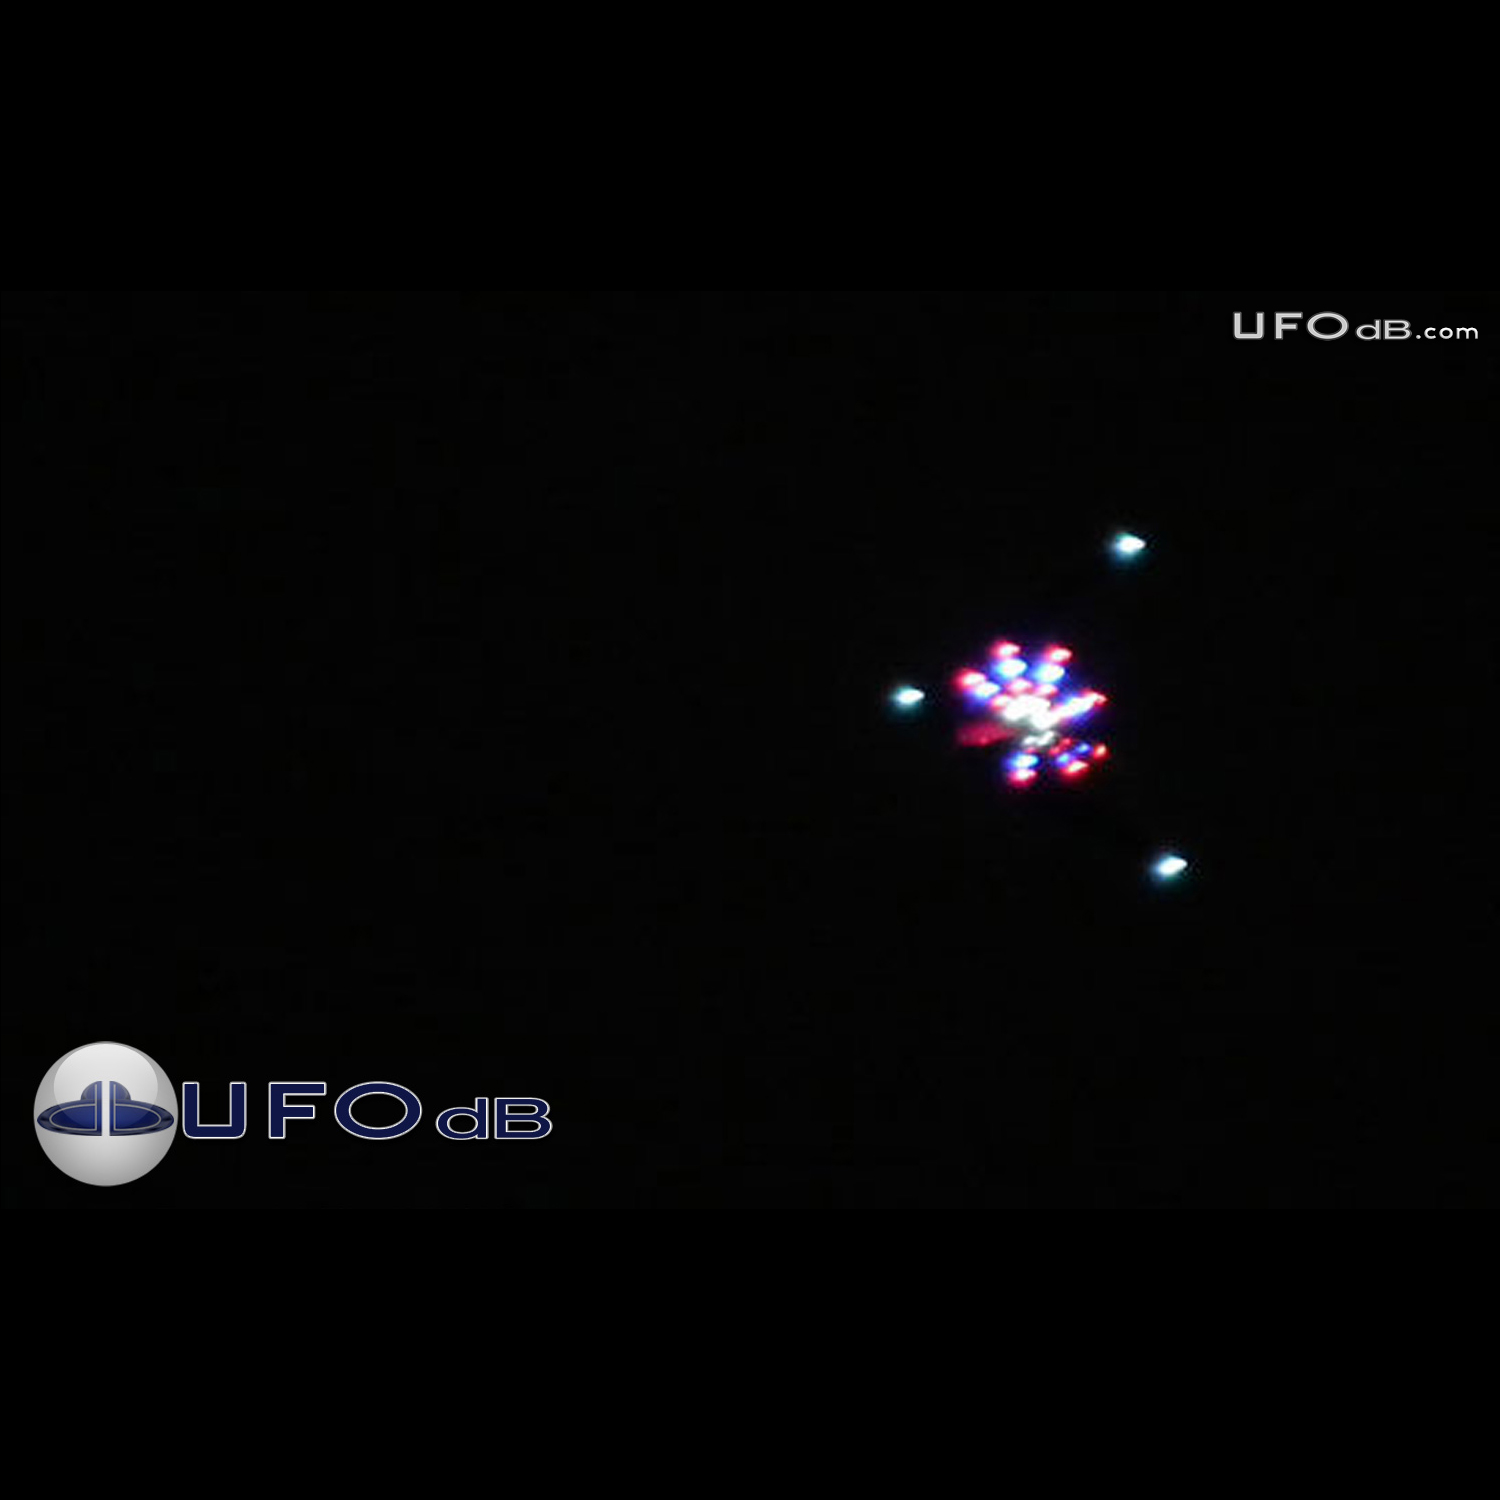 Mr. Shaw photograph a Triangular UFO formation - China - April 30 2011 UFO Picture #281-1